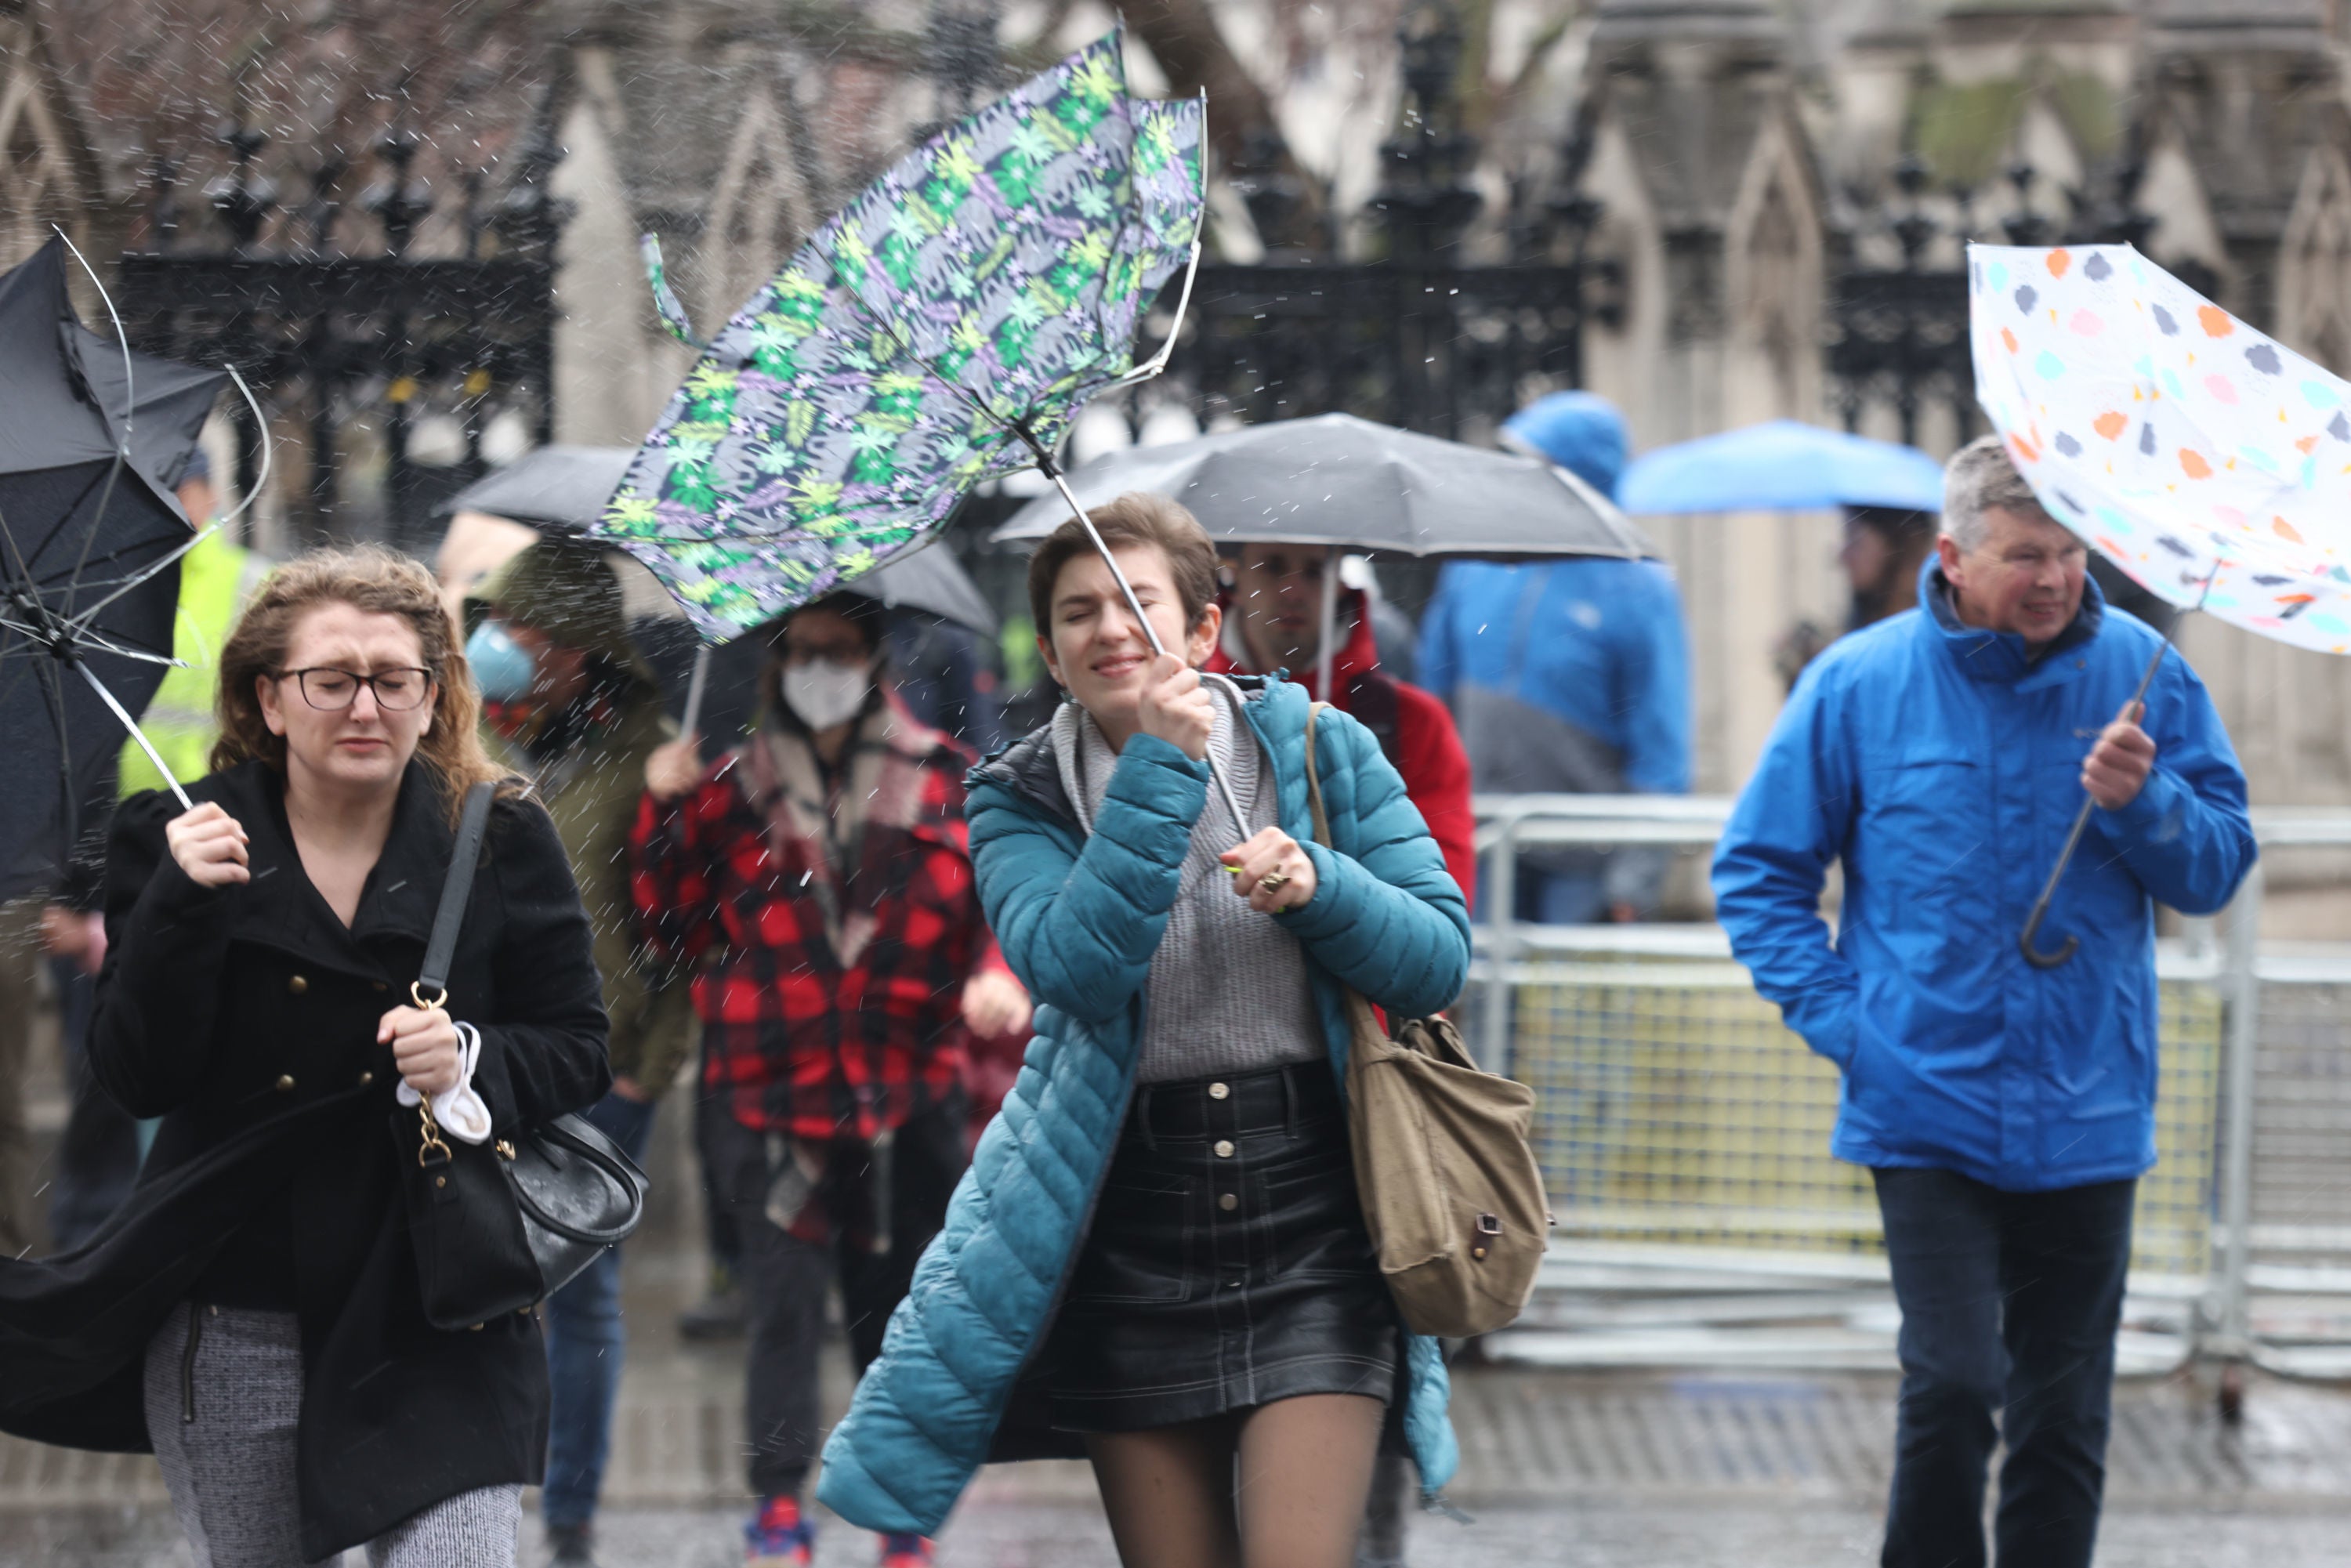 Londoners brace against the wind and wet weather in Westminster